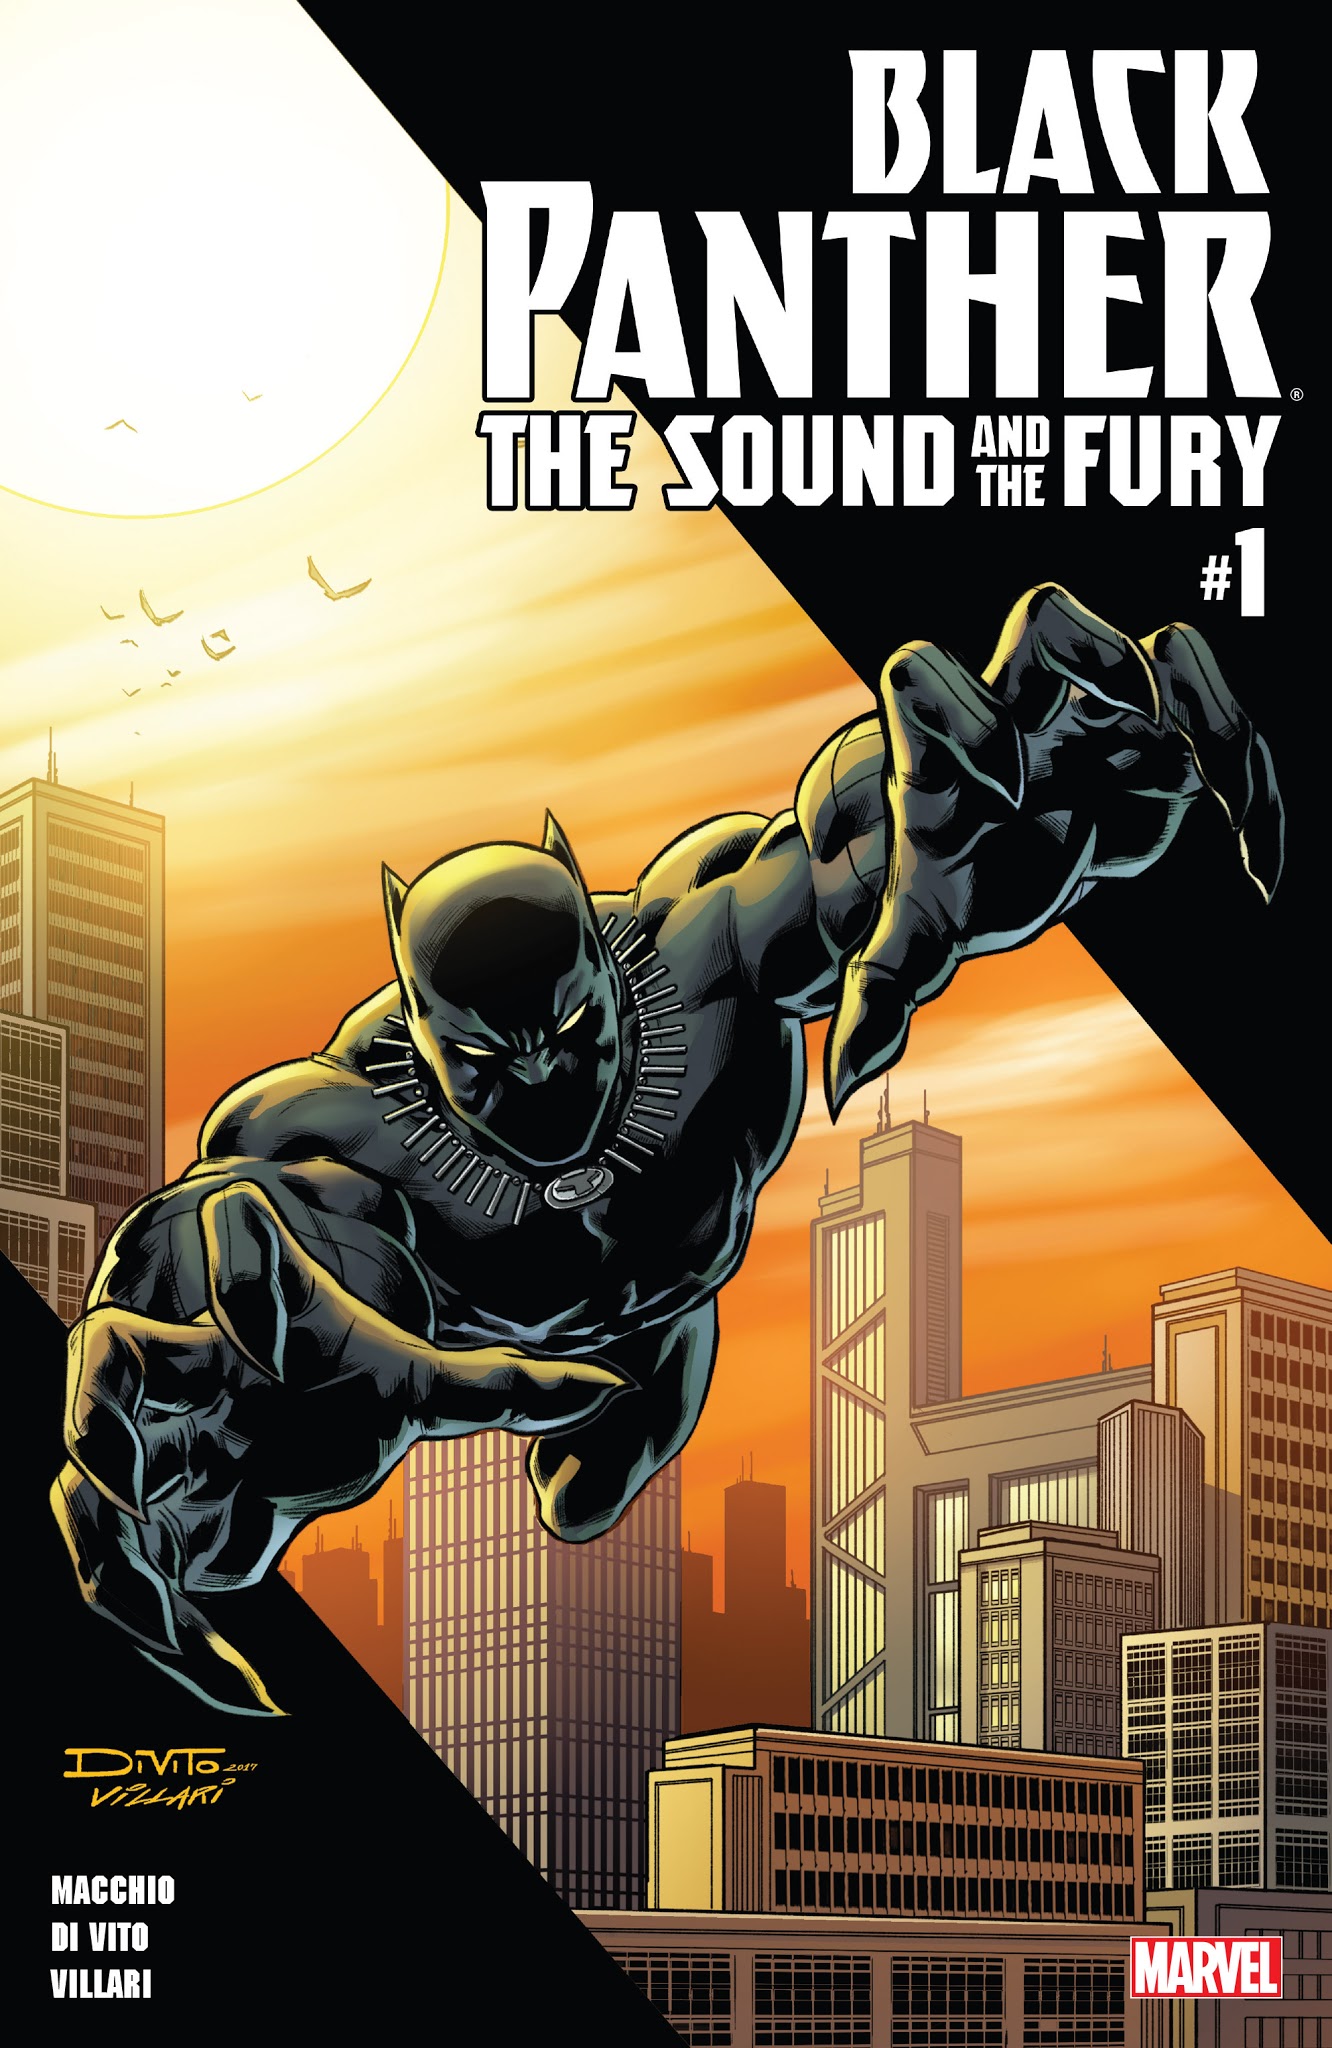 Read online Black Panther: The Sound and the Fury comic -  Issue # Full - 1